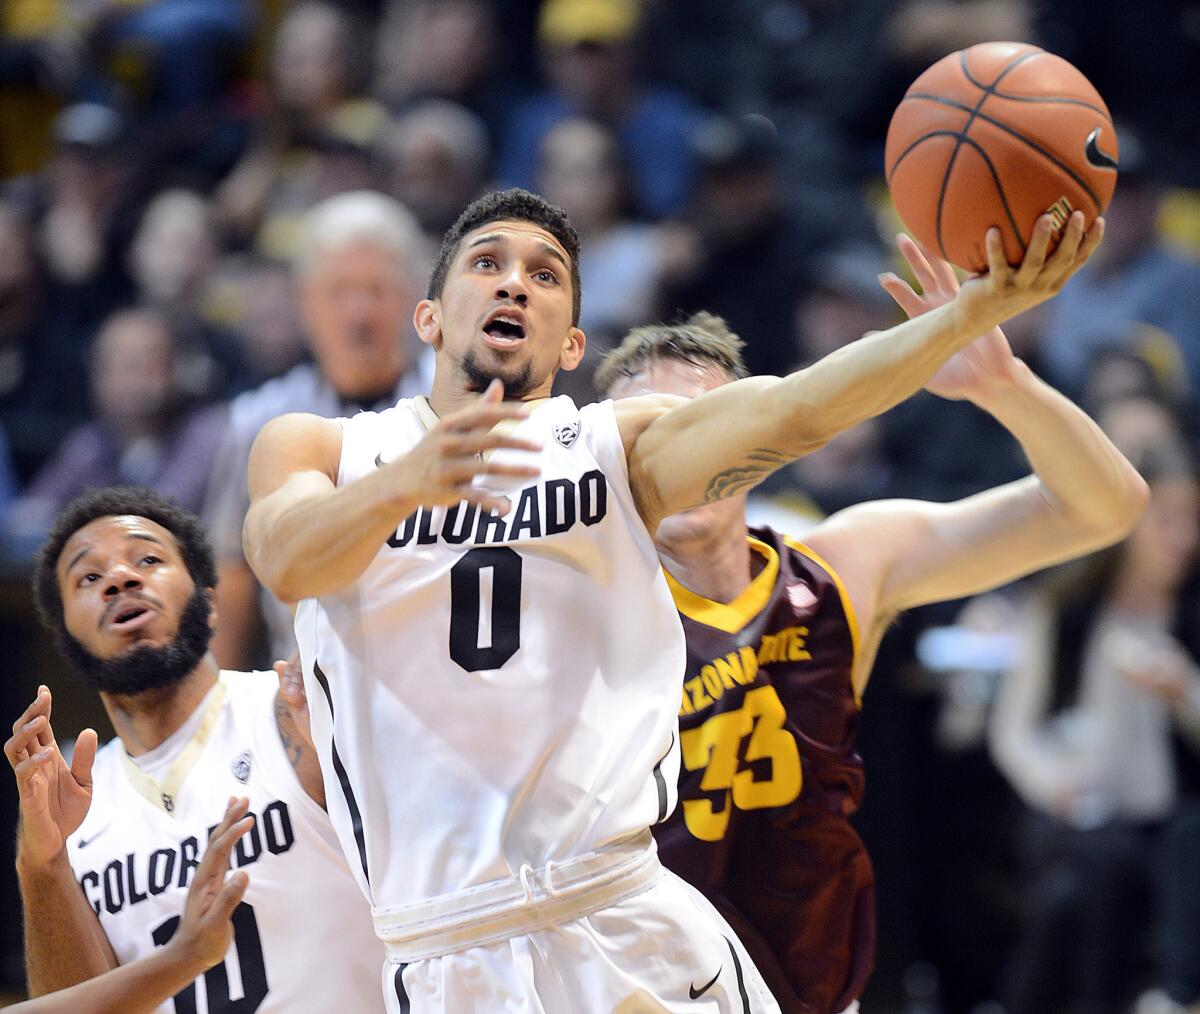 Colorado guard Askia Booker drives to the hoop during a game against Arizona State on March 1.